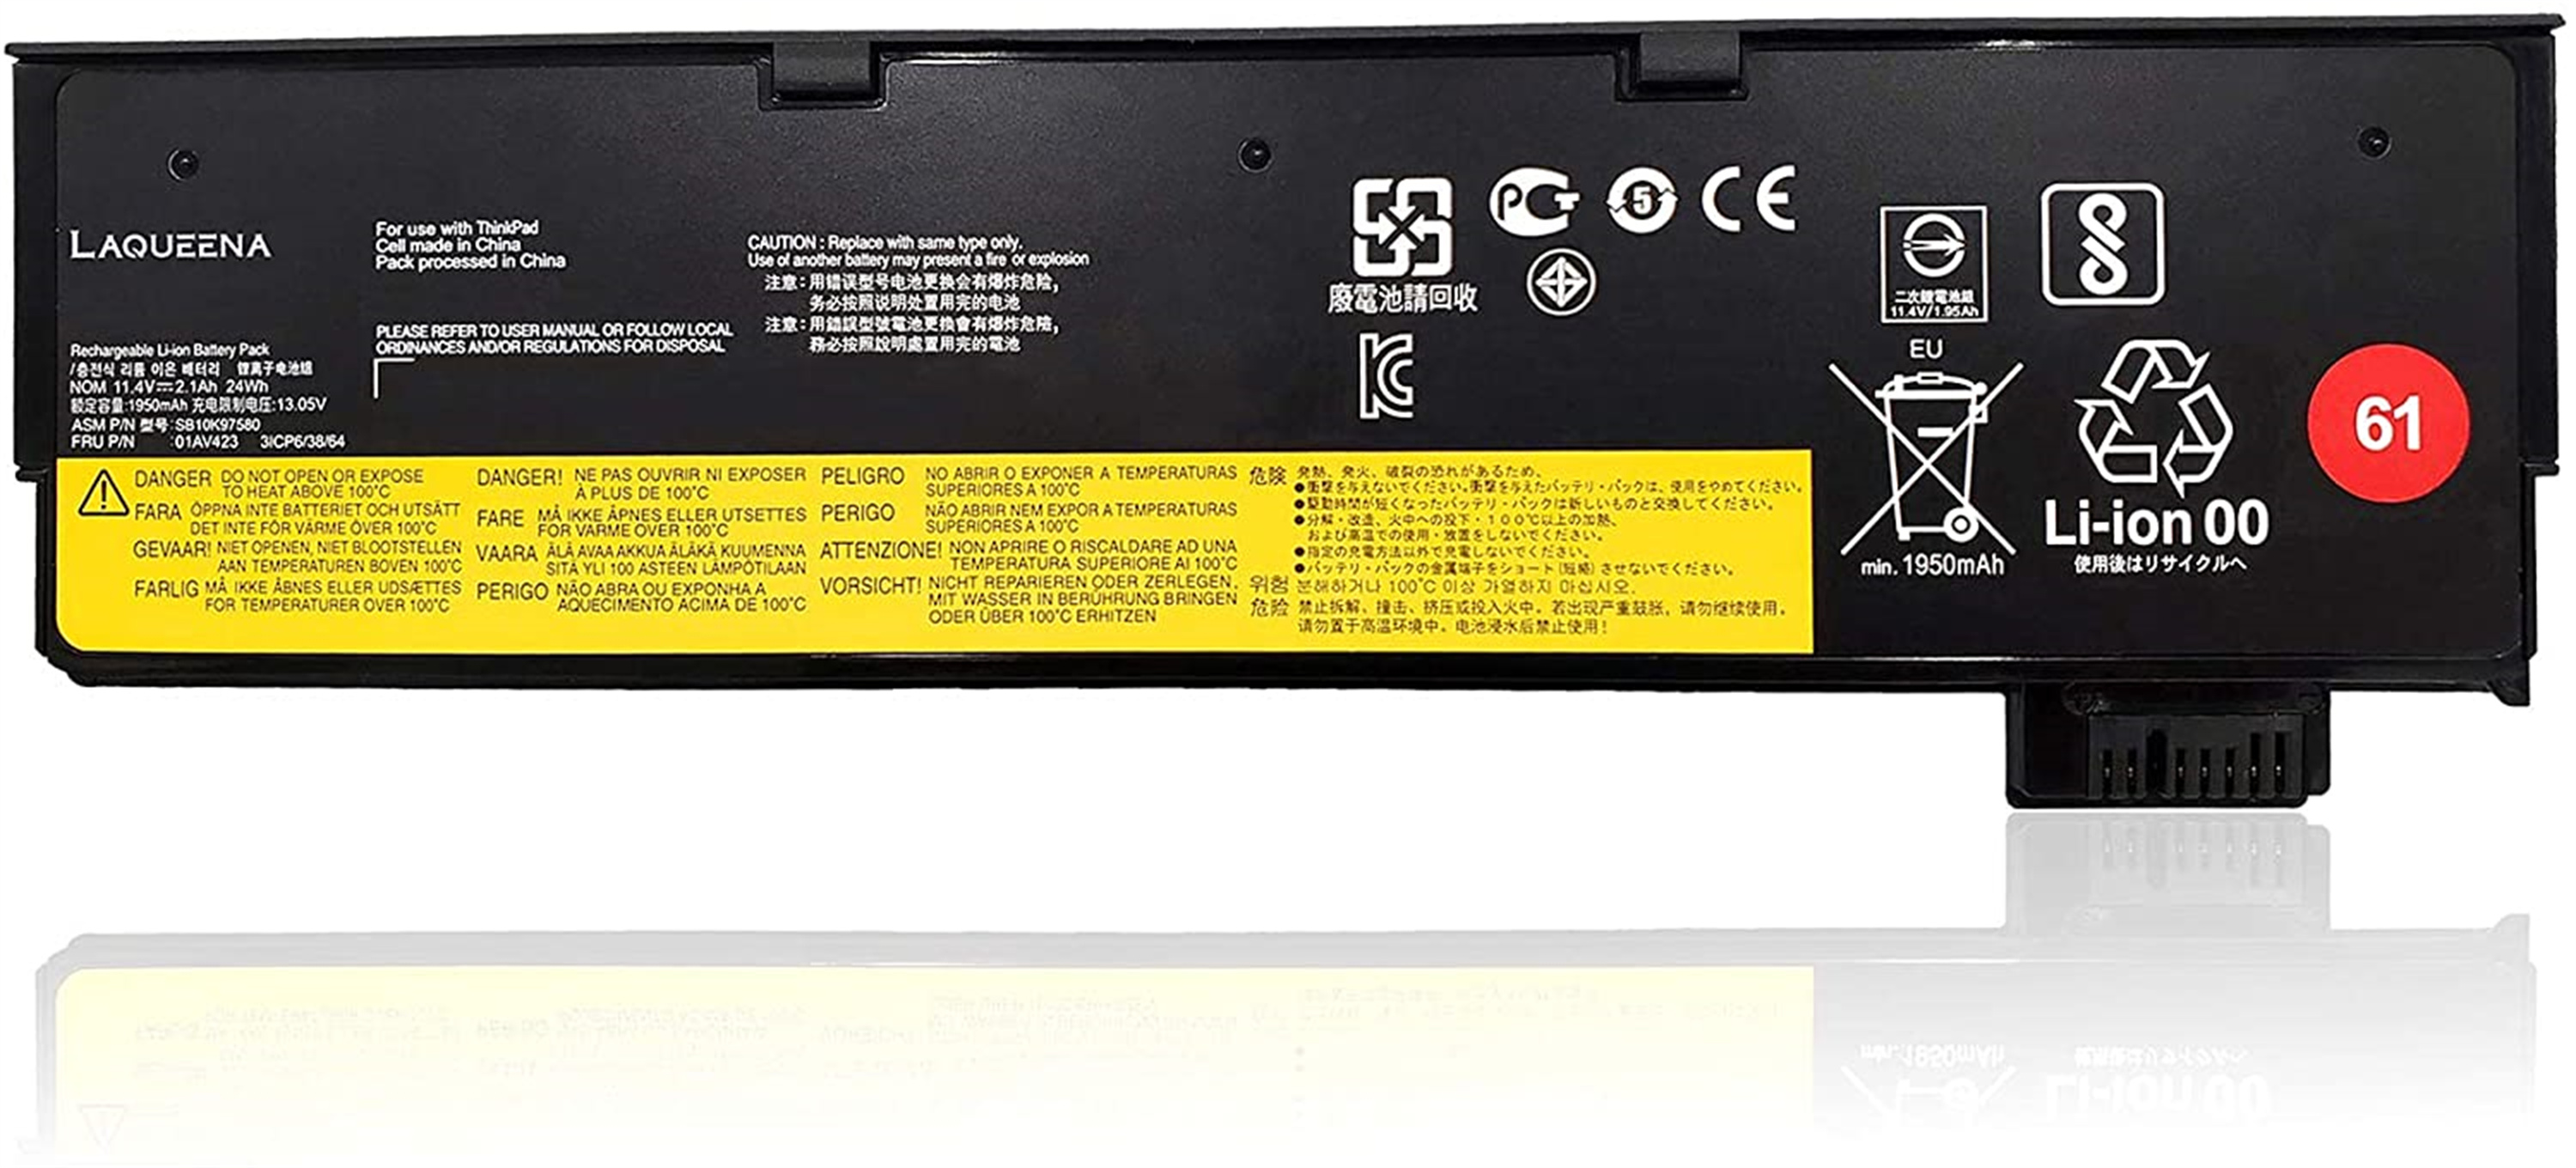 SB10K97580 rechargeable lithium ion Notebook battery Laptop battery For Lenovo ThinkPad A475 A485 T470 T570 T480 T580 P51S P52S TP25 24WH/2100MAH 11.4V 3Cell 